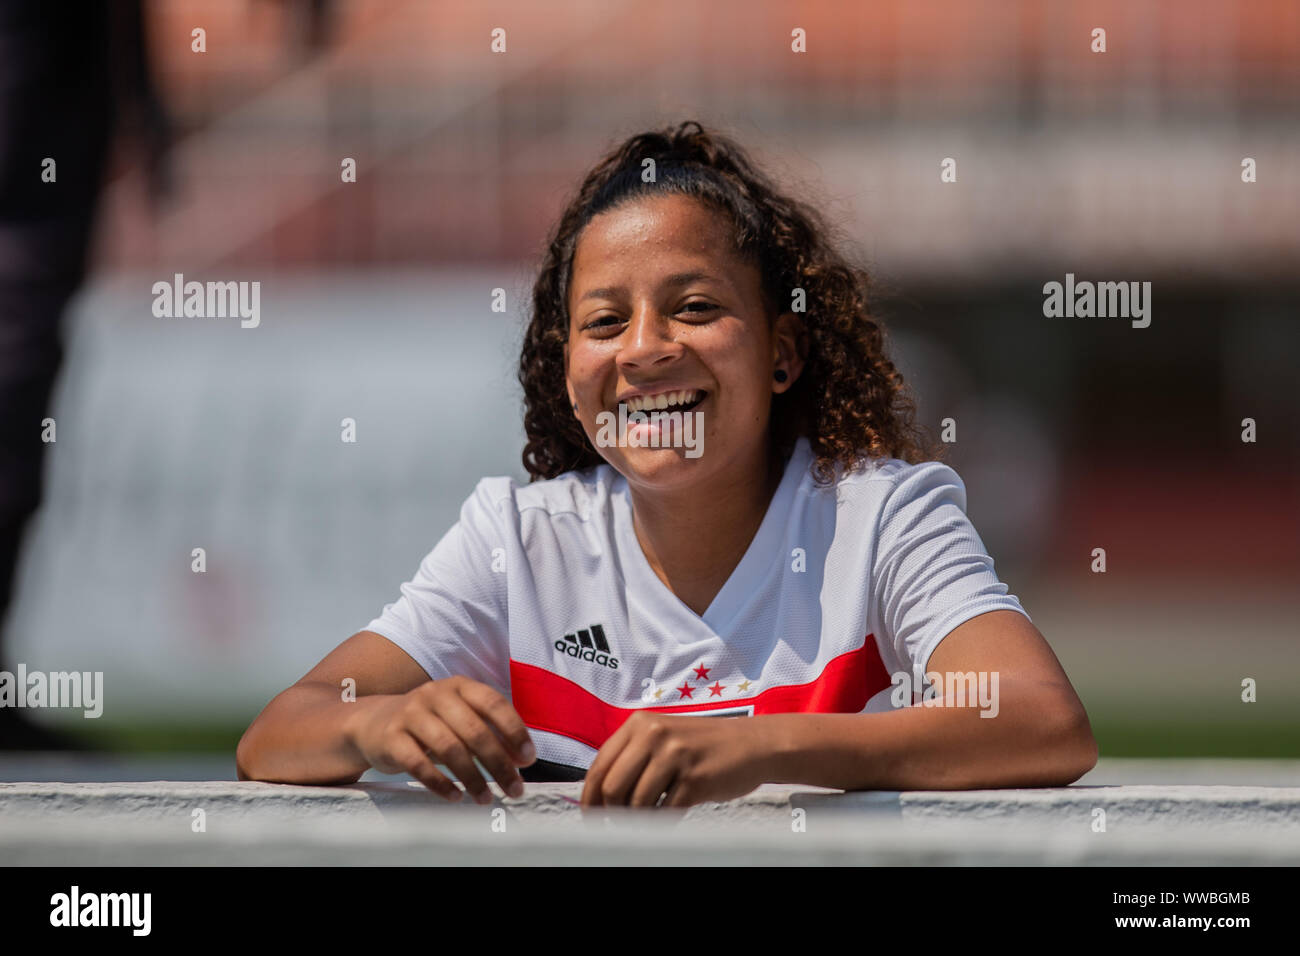 Sao Paulo, Brazil. 14 September 2019.  SÃO PAULO X SANTOS - Iara from Sao Paulo celebrates the victory. São Paulo and Santos play in the semi-finals of the Paulista Women's Football Championship. The first game will be played on the morning of Saturday, Septe 14, at Pacaembu Stadium, in, in São Paulo. (Photo: Van Campos/Fotoarena) Credit: Foto Arena LTDA/Alamy Live News Stock Photo